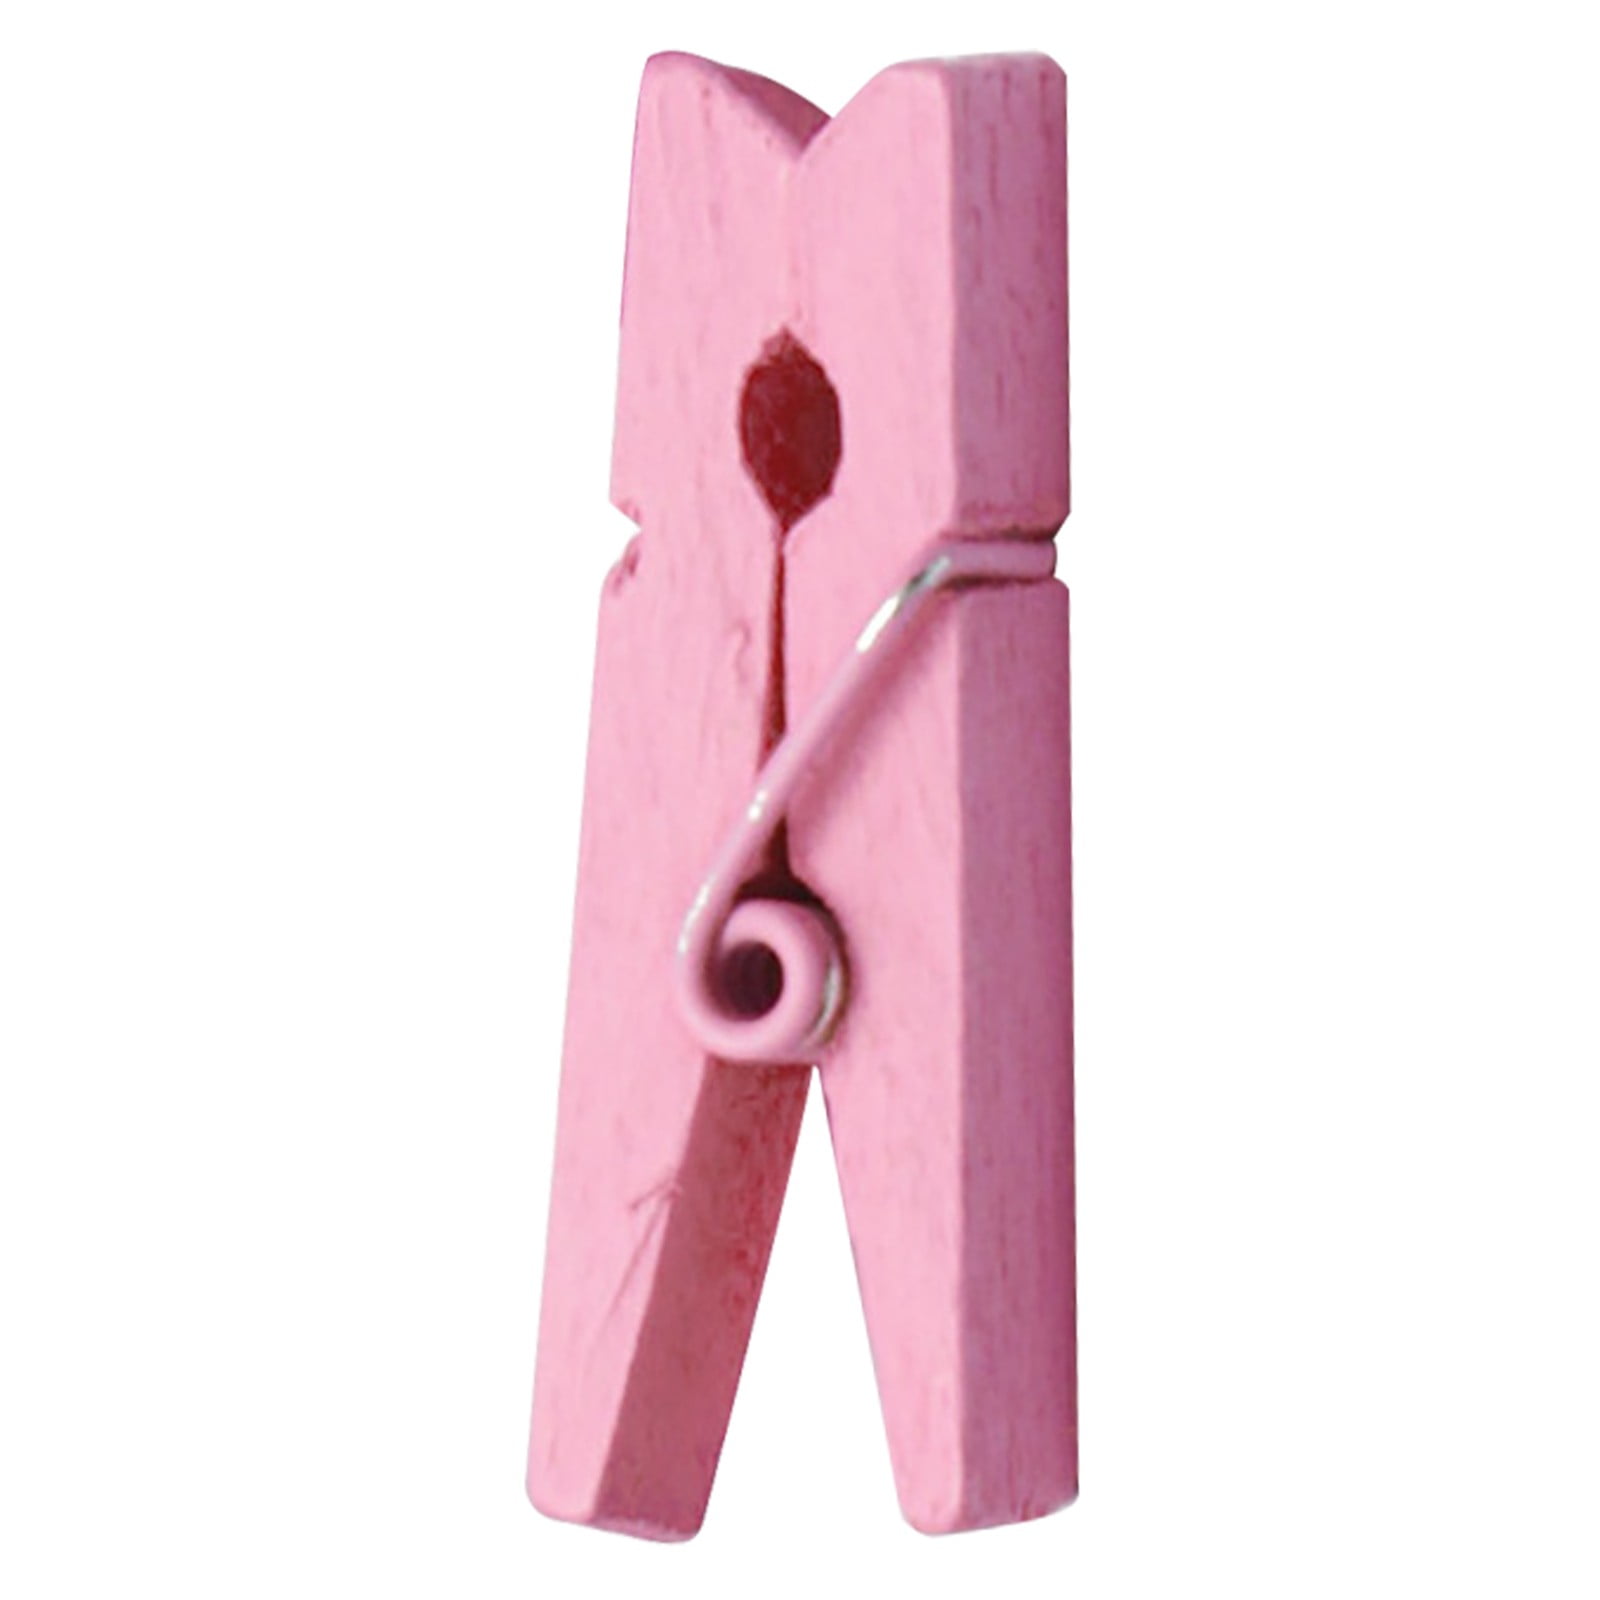 Mini Clothespins Pink wood wooden Baby Girl 24 or 72 PCS Scrapbooking and Party Supply